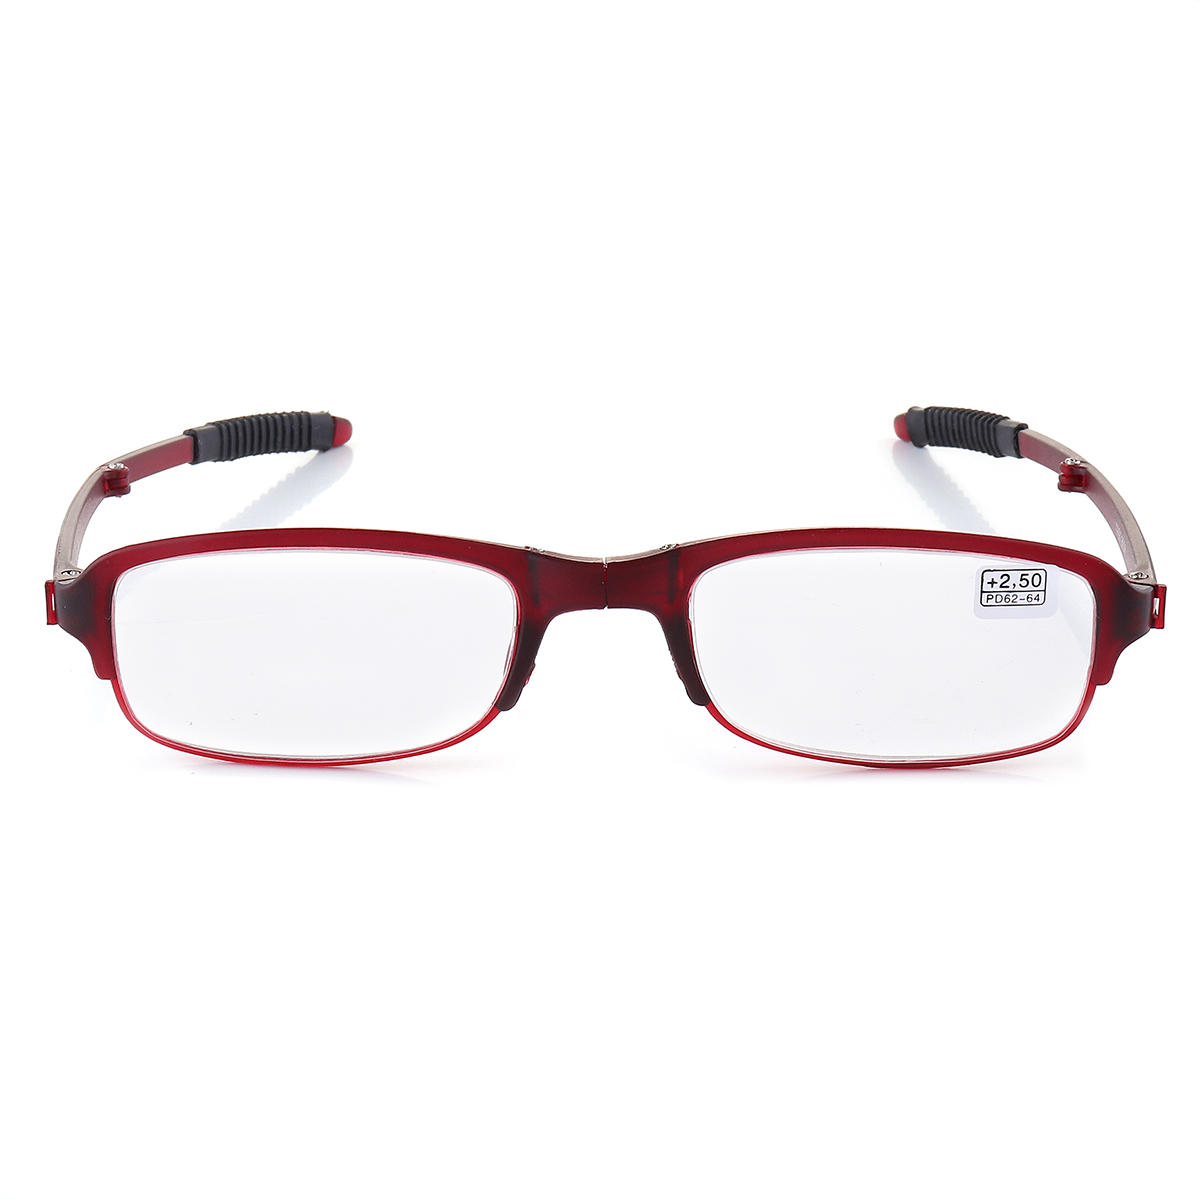 

TR90 Soft Light Weight Folding Best Reading Glasses Magnifying Fatigue Relief